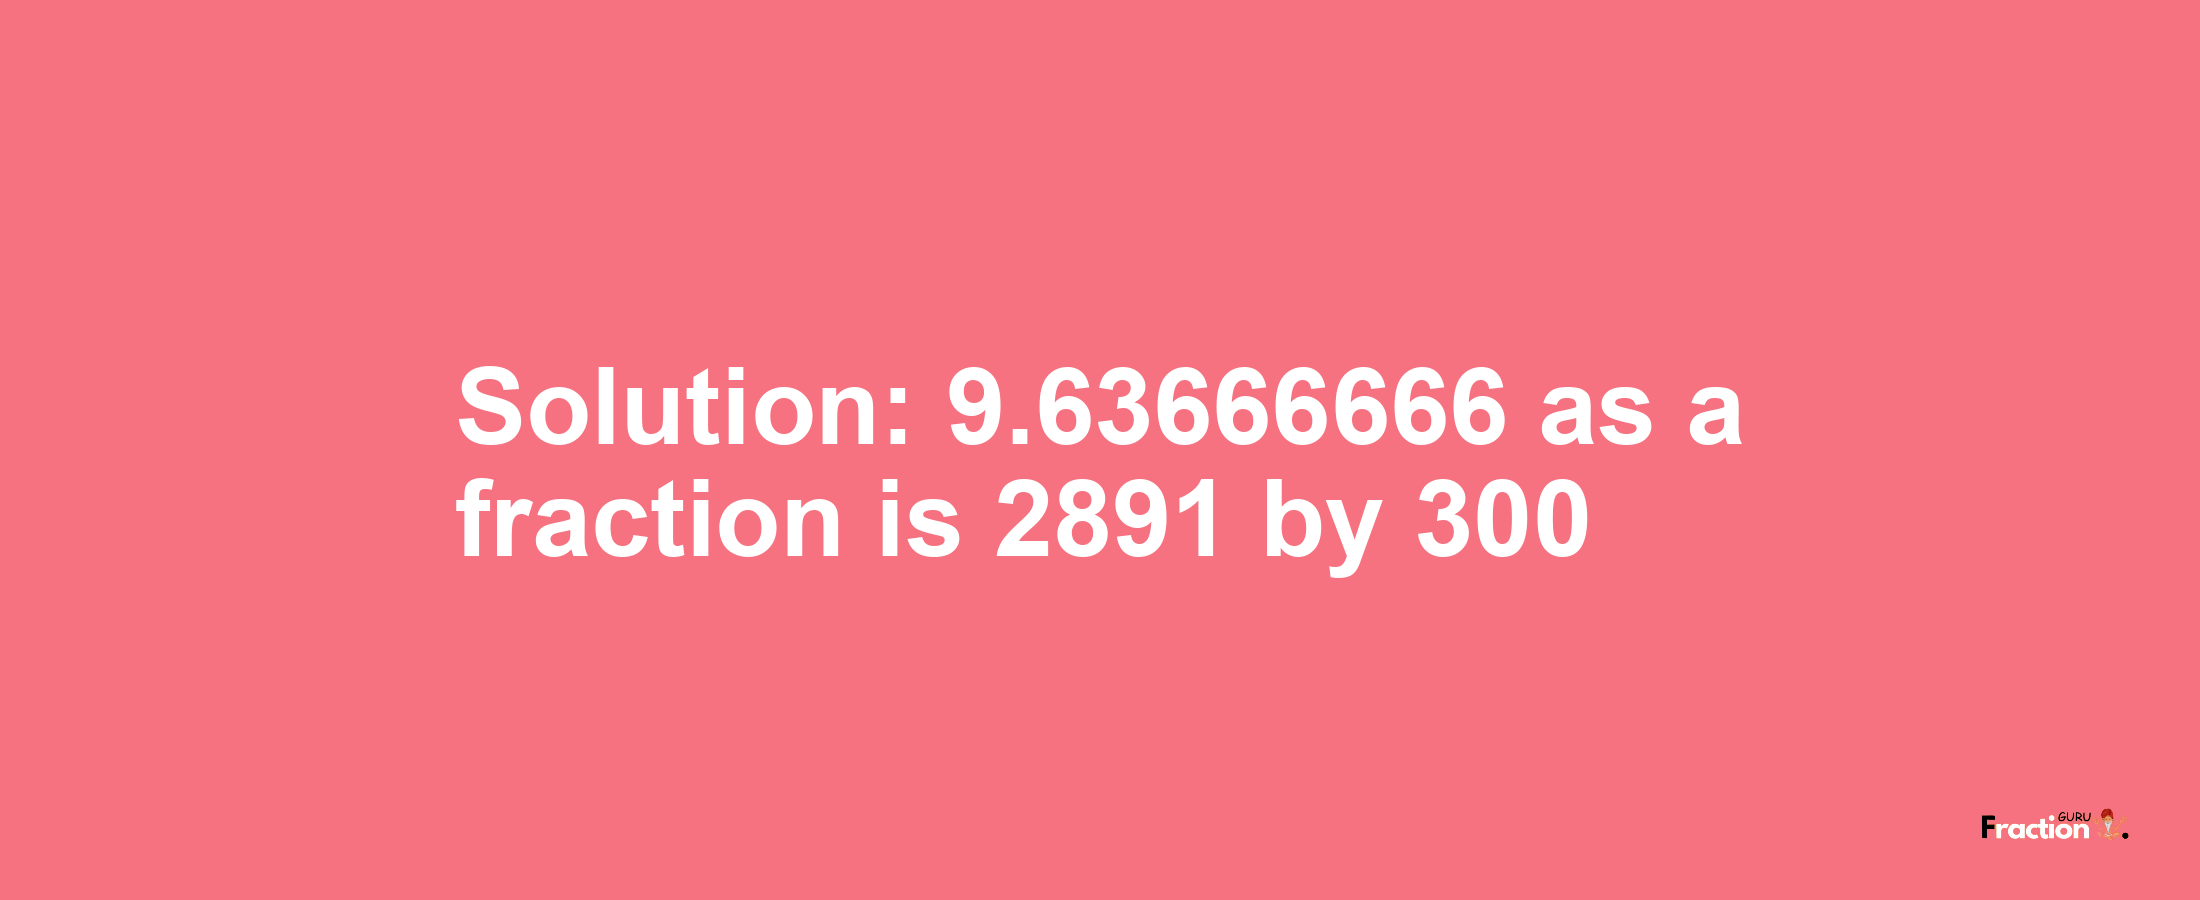 Solution:9.63666666 as a fraction is 2891/300